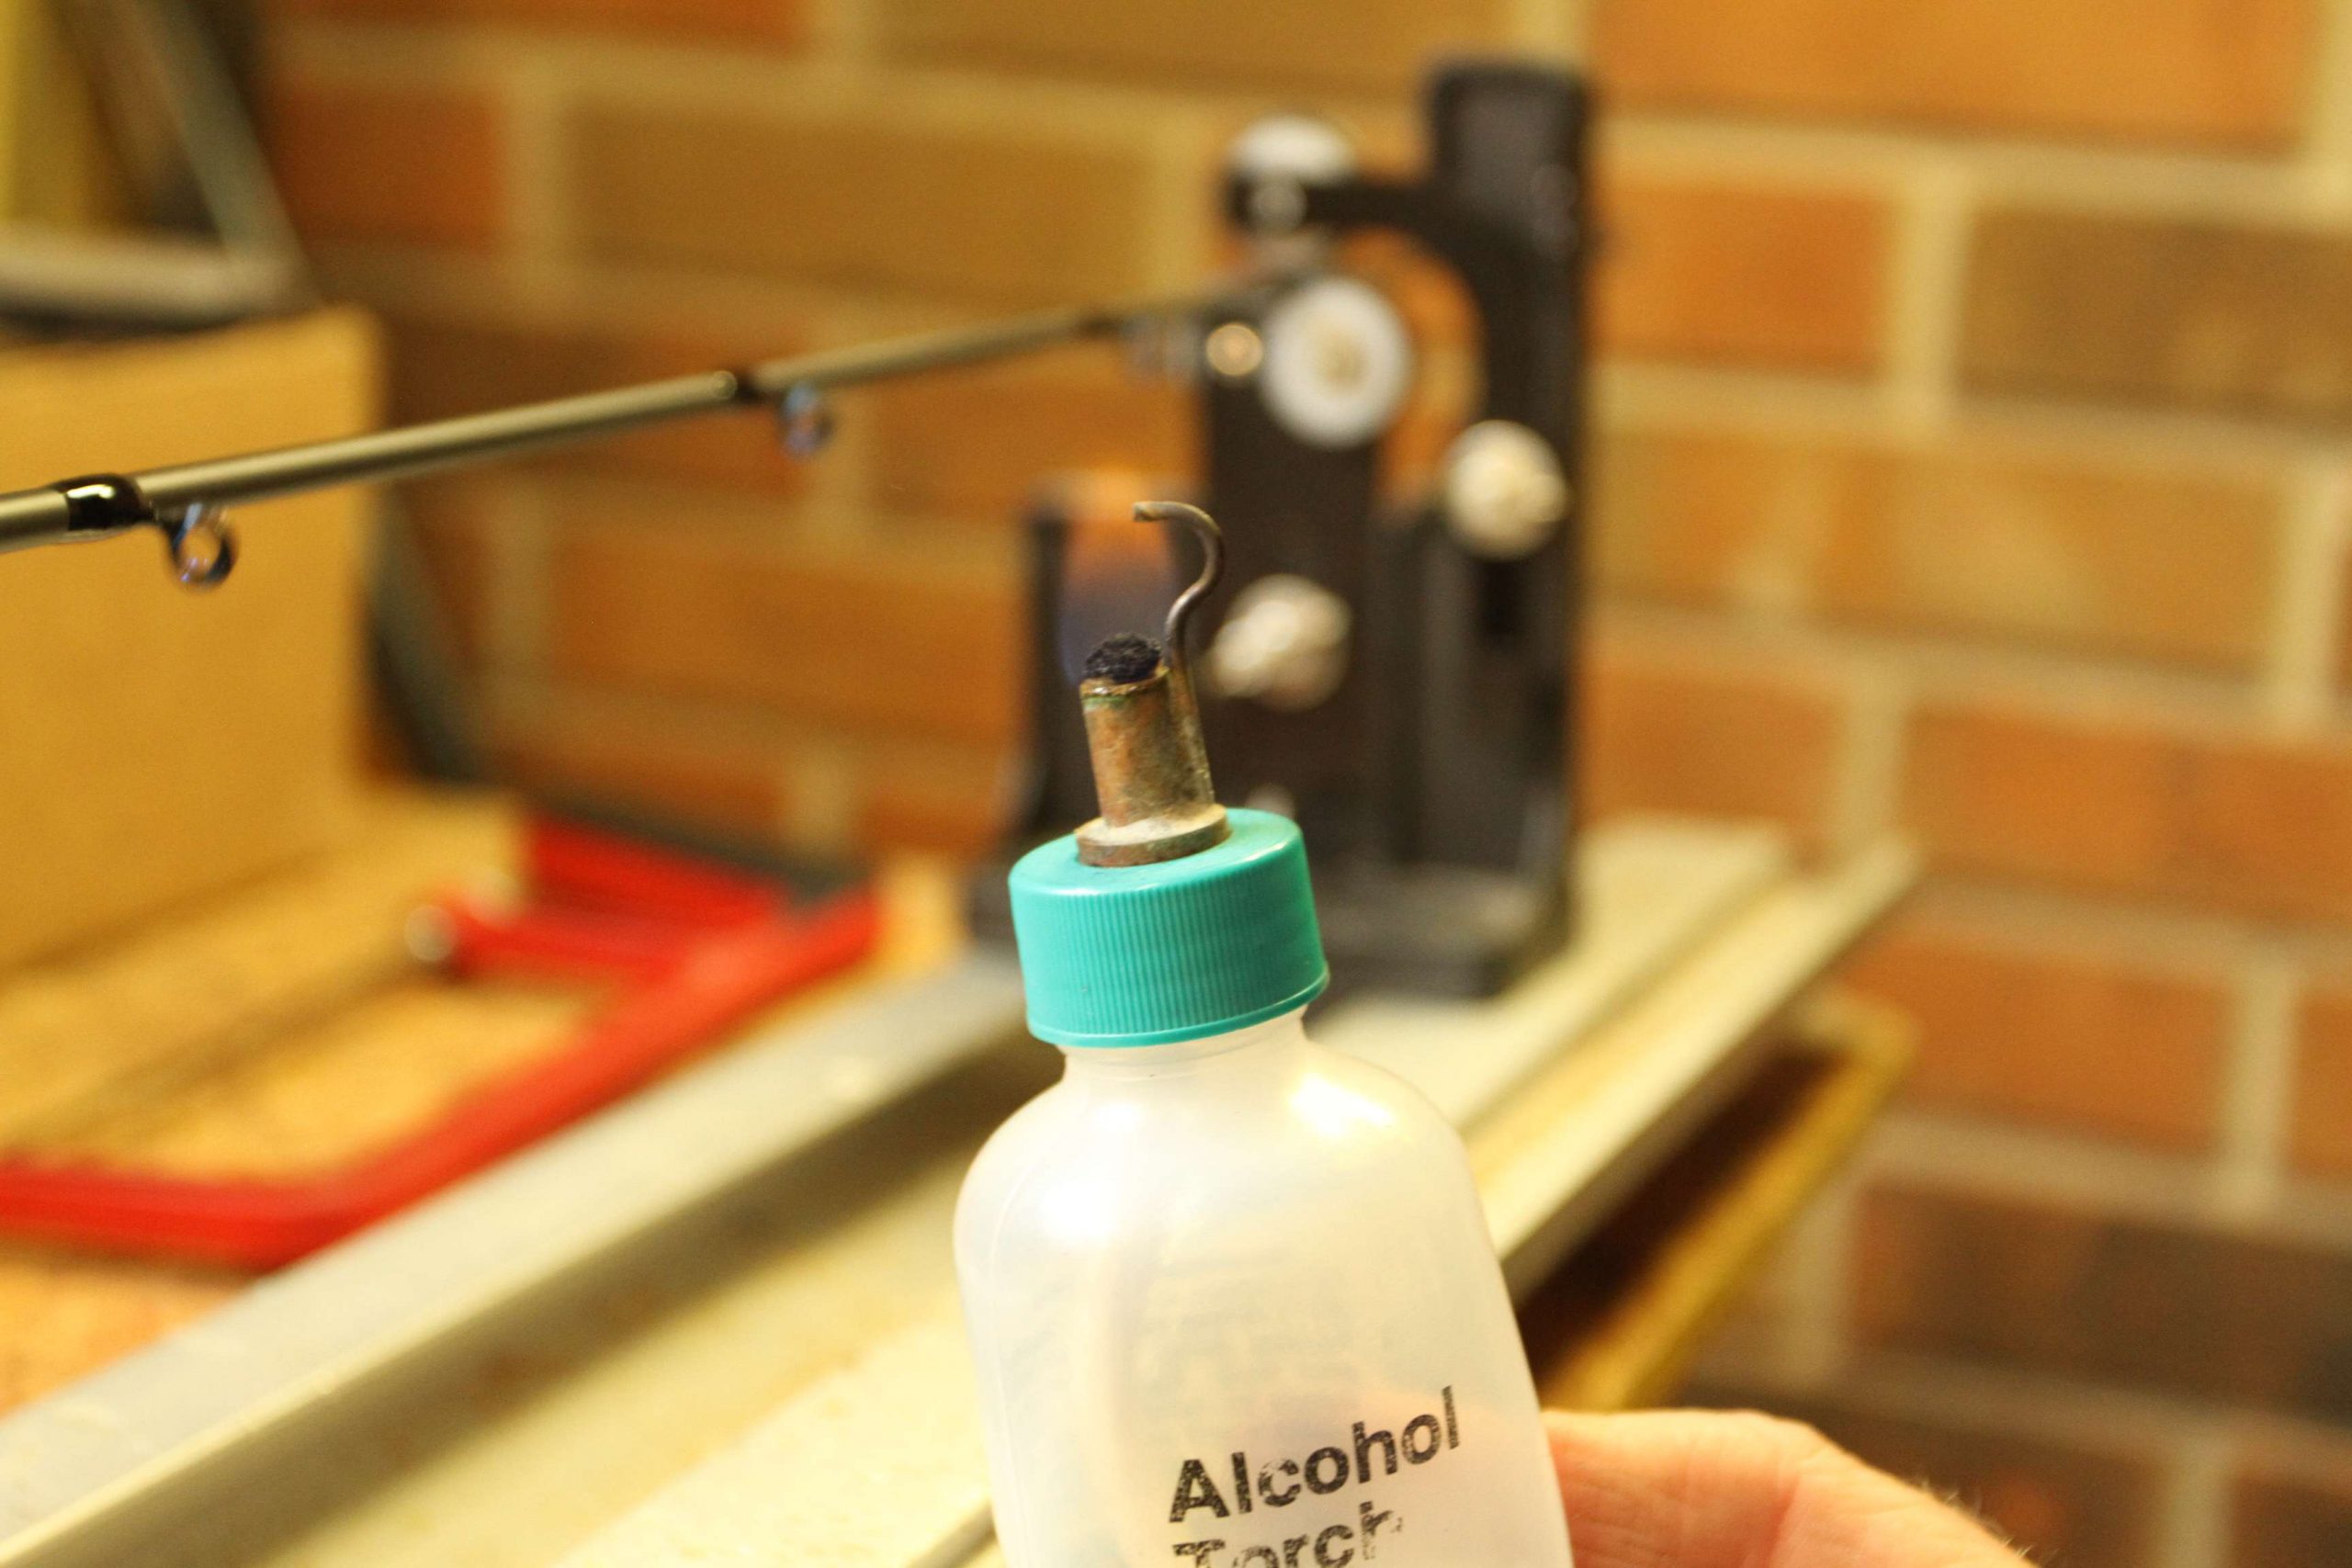 Once each guide has been coated, he keeps an alcohol bubble torch on hand. This nifty tool is used to remove any bubbles and imperfections that may occur when the flexcoat is applied. 